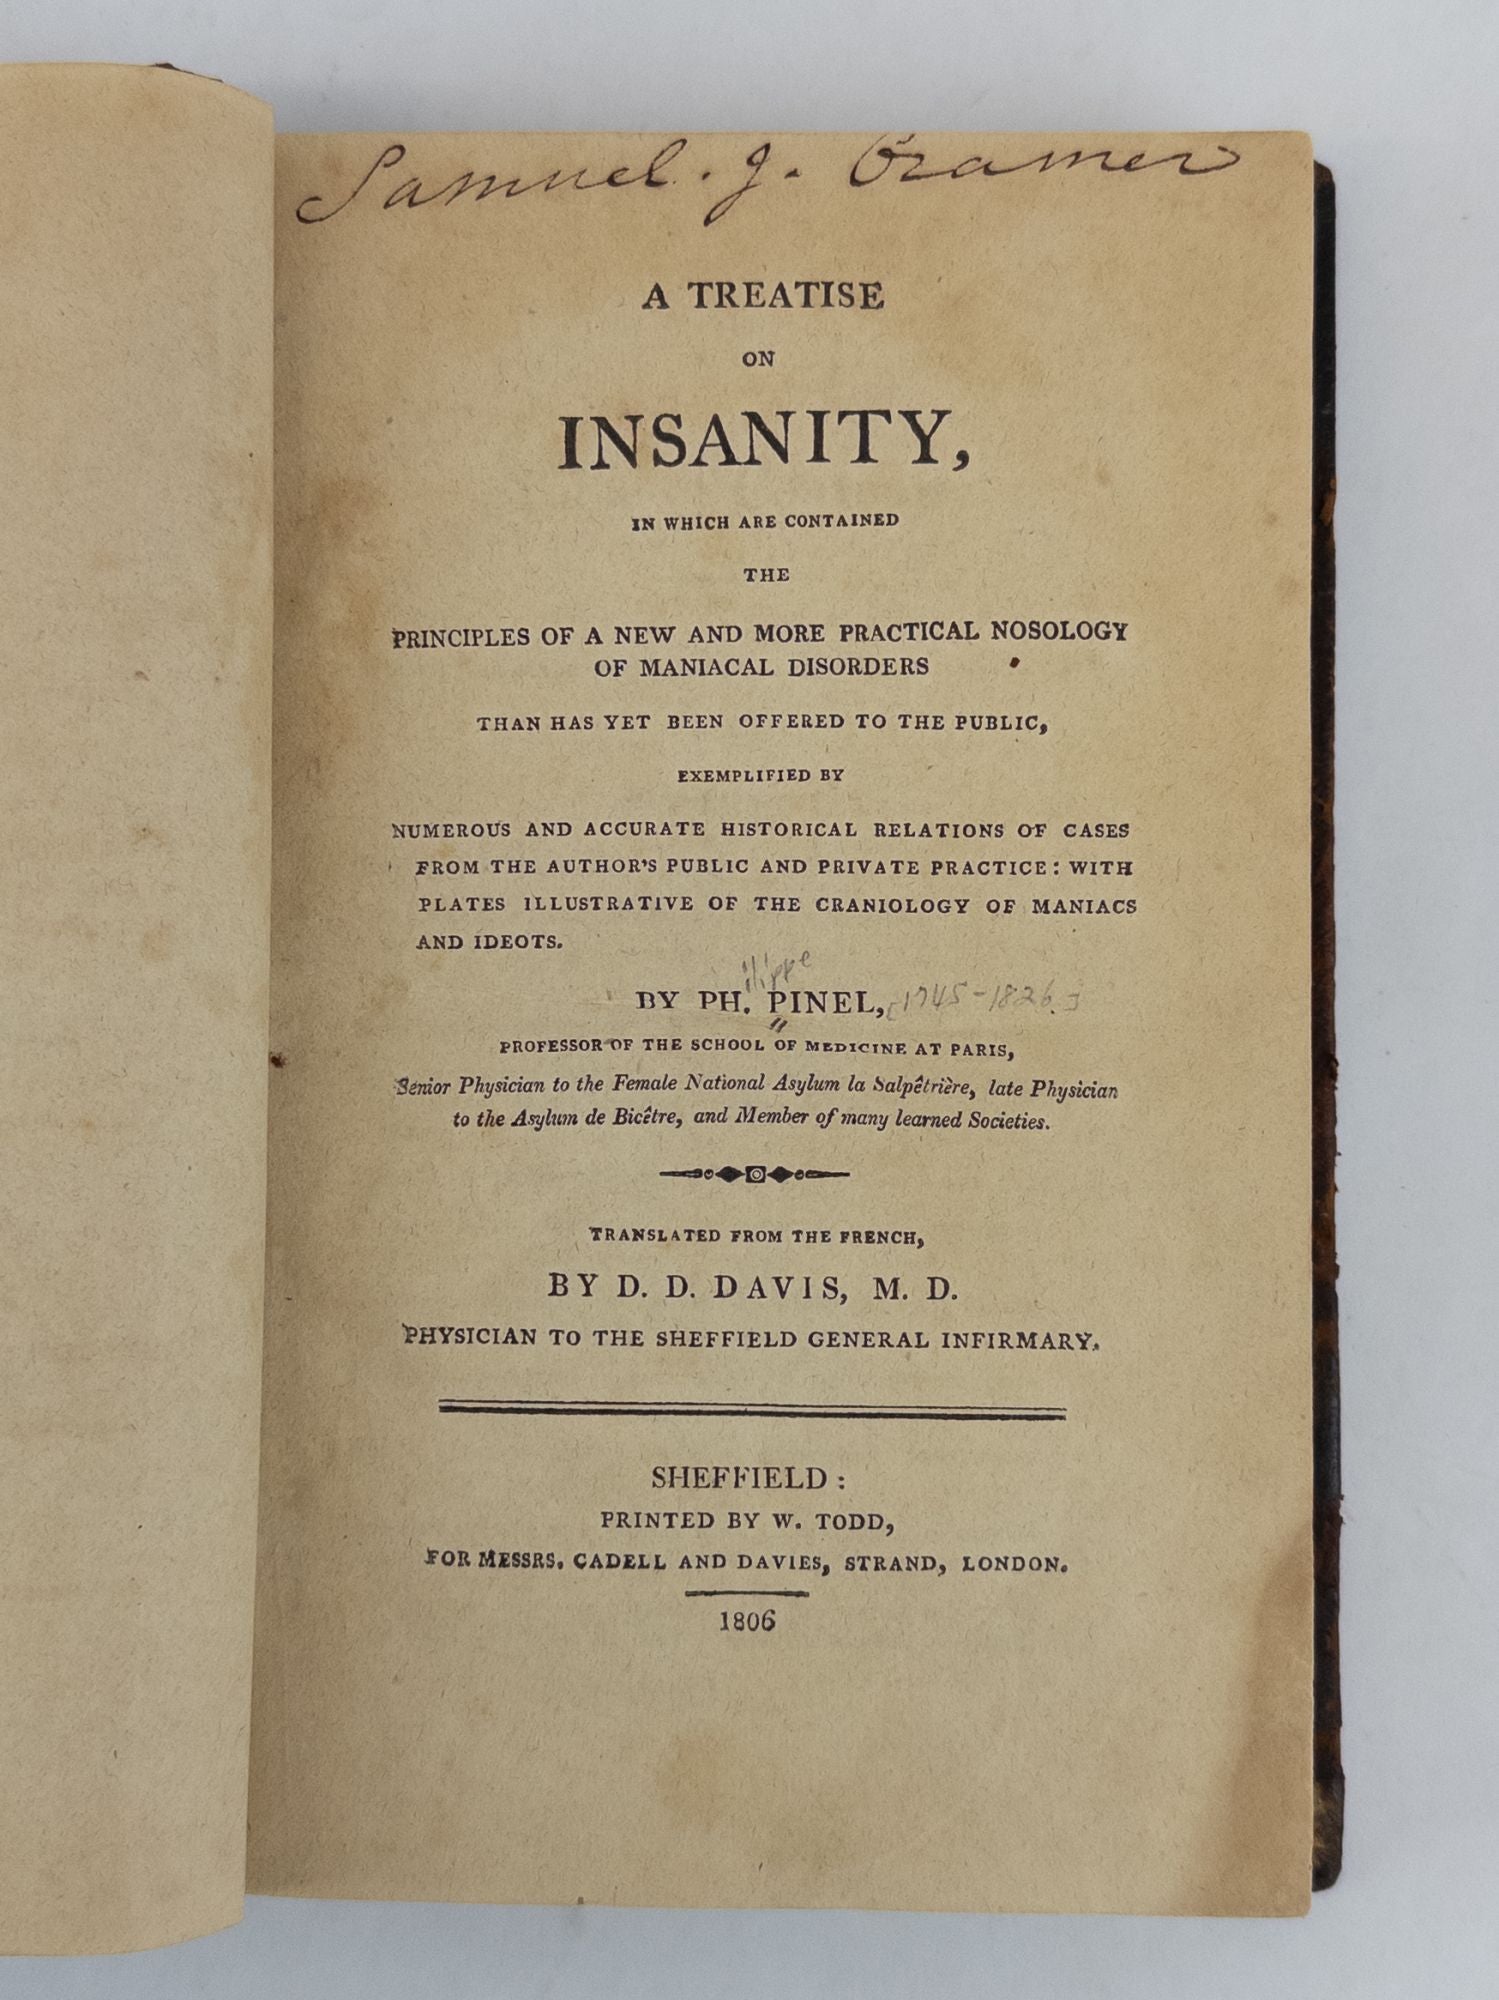 Product Image for A TREATISE ON INSANITY, IN WHICH ARE CONTAINED THE PRINCIPLES OF A NEW AND MORE PRACTICAL NOSOLOGY OF MANIACAL DISORDERS THAN HAS YET BEEN OFFERED TO THE PUBLIC, EXEMPLIFIED BY NUMEROUS AND ACCURATE HISTORICAL RELATIONS OF CASES FROM THE AUTHOR'S PUBLIC A